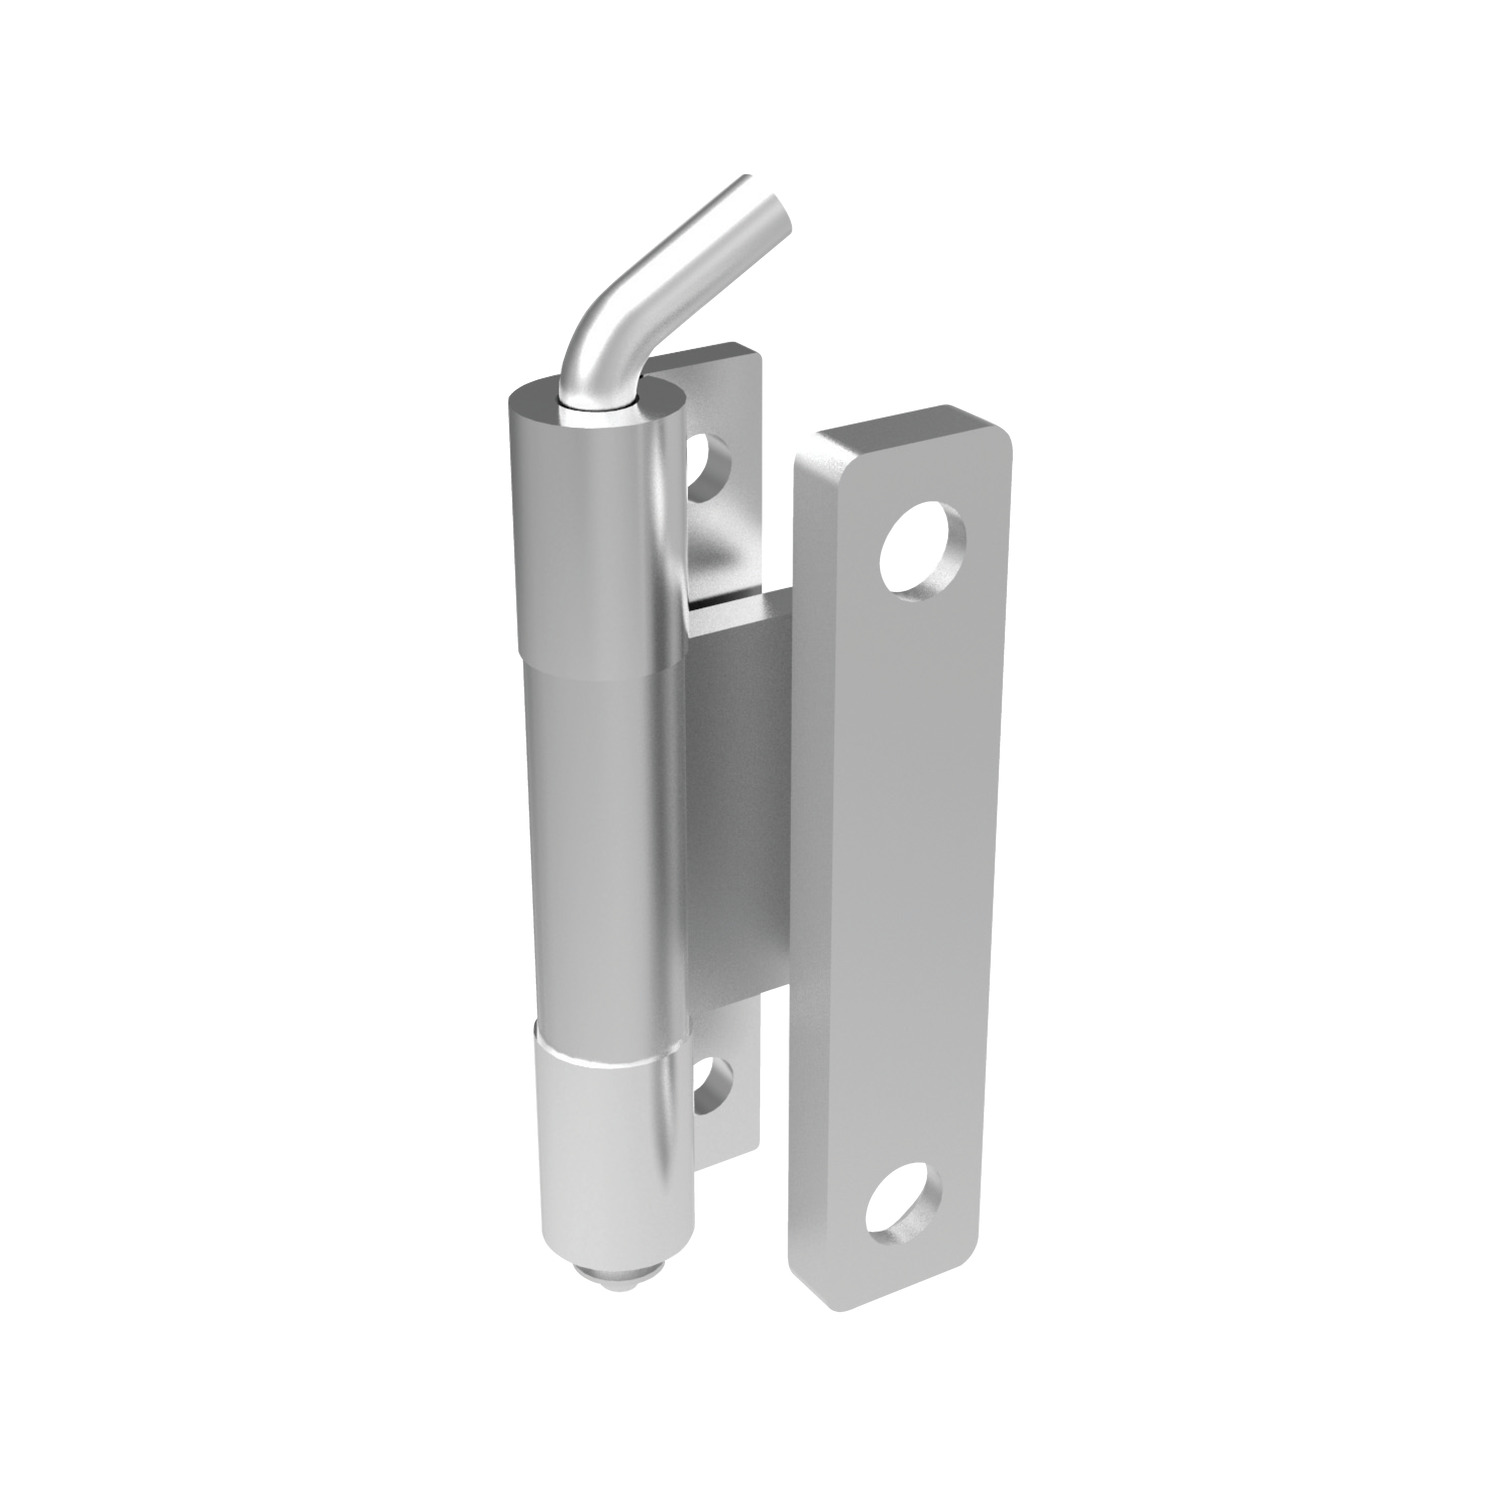 Concealed Pivot Hinges - Lift Off Concealed Pivot Hinges for doors with a 23mm return. Weld and countersunk screws. Made from steel.